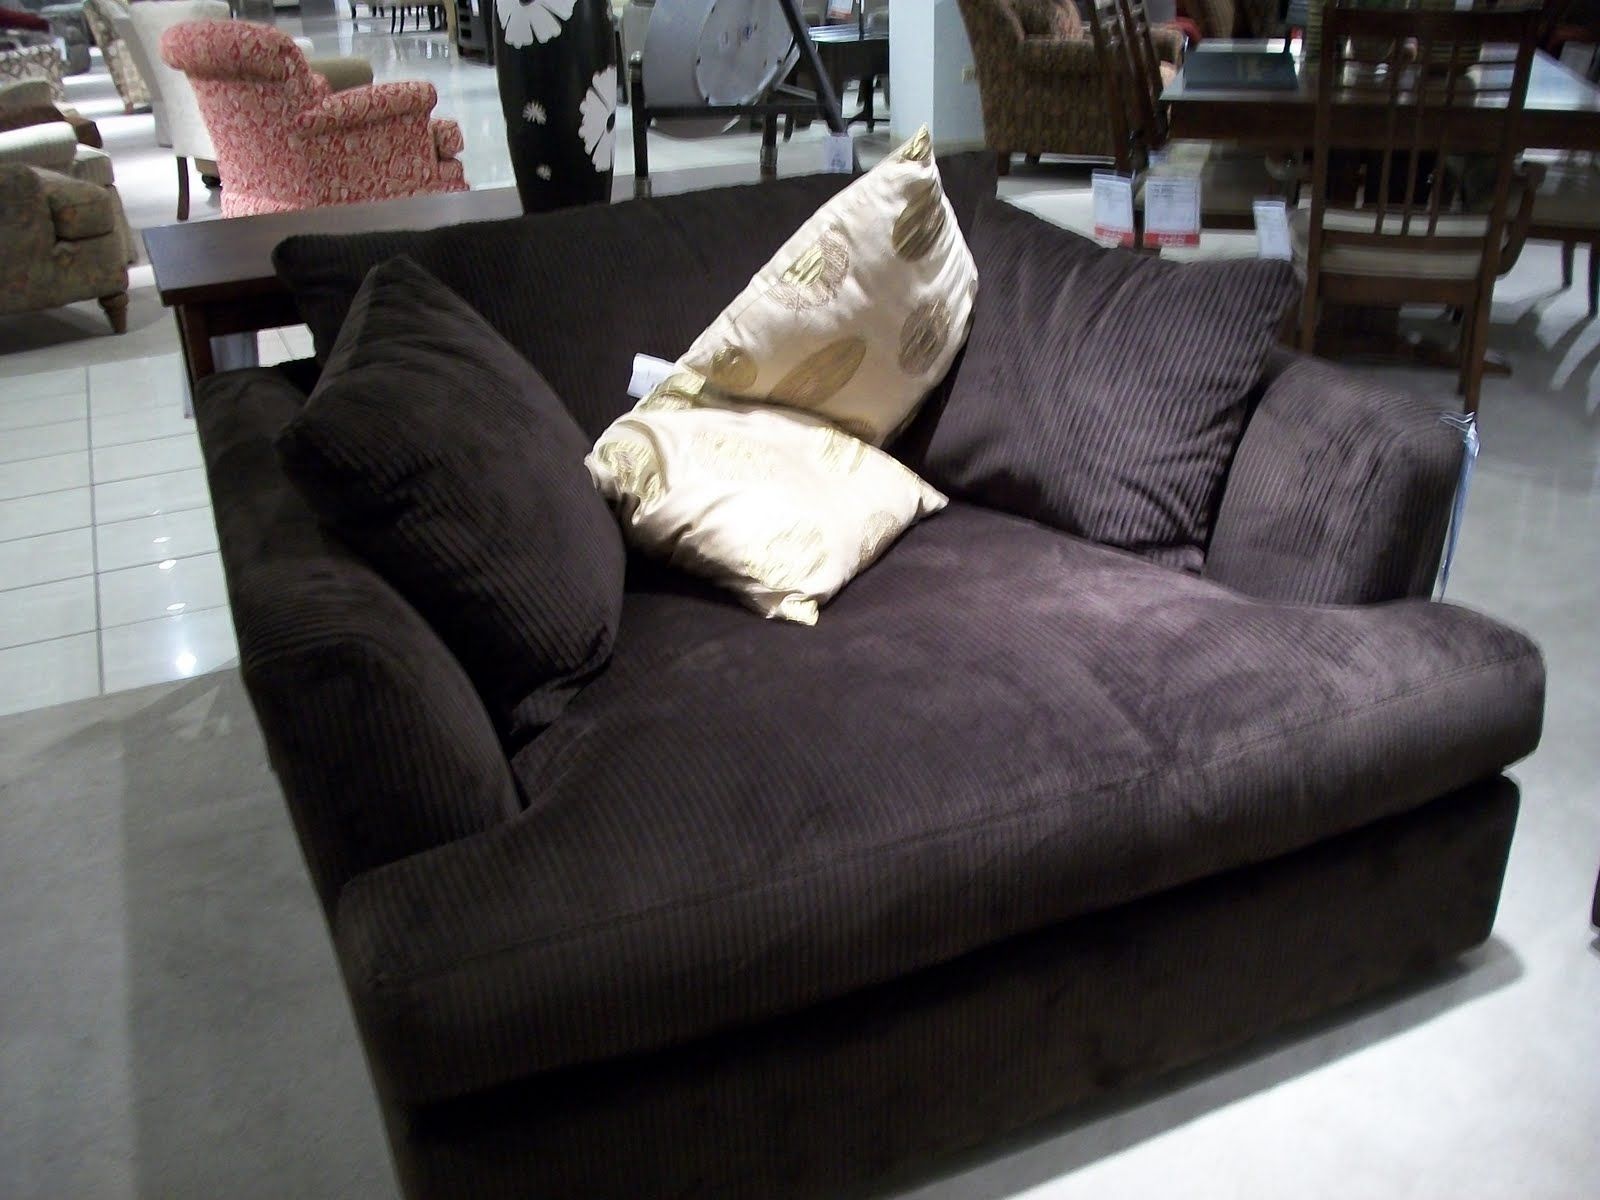 Big Comfy Oversized Armchair Where You Can Snuggle Up With A Good Inside Large Sofa Chairs (View 1 of 15)